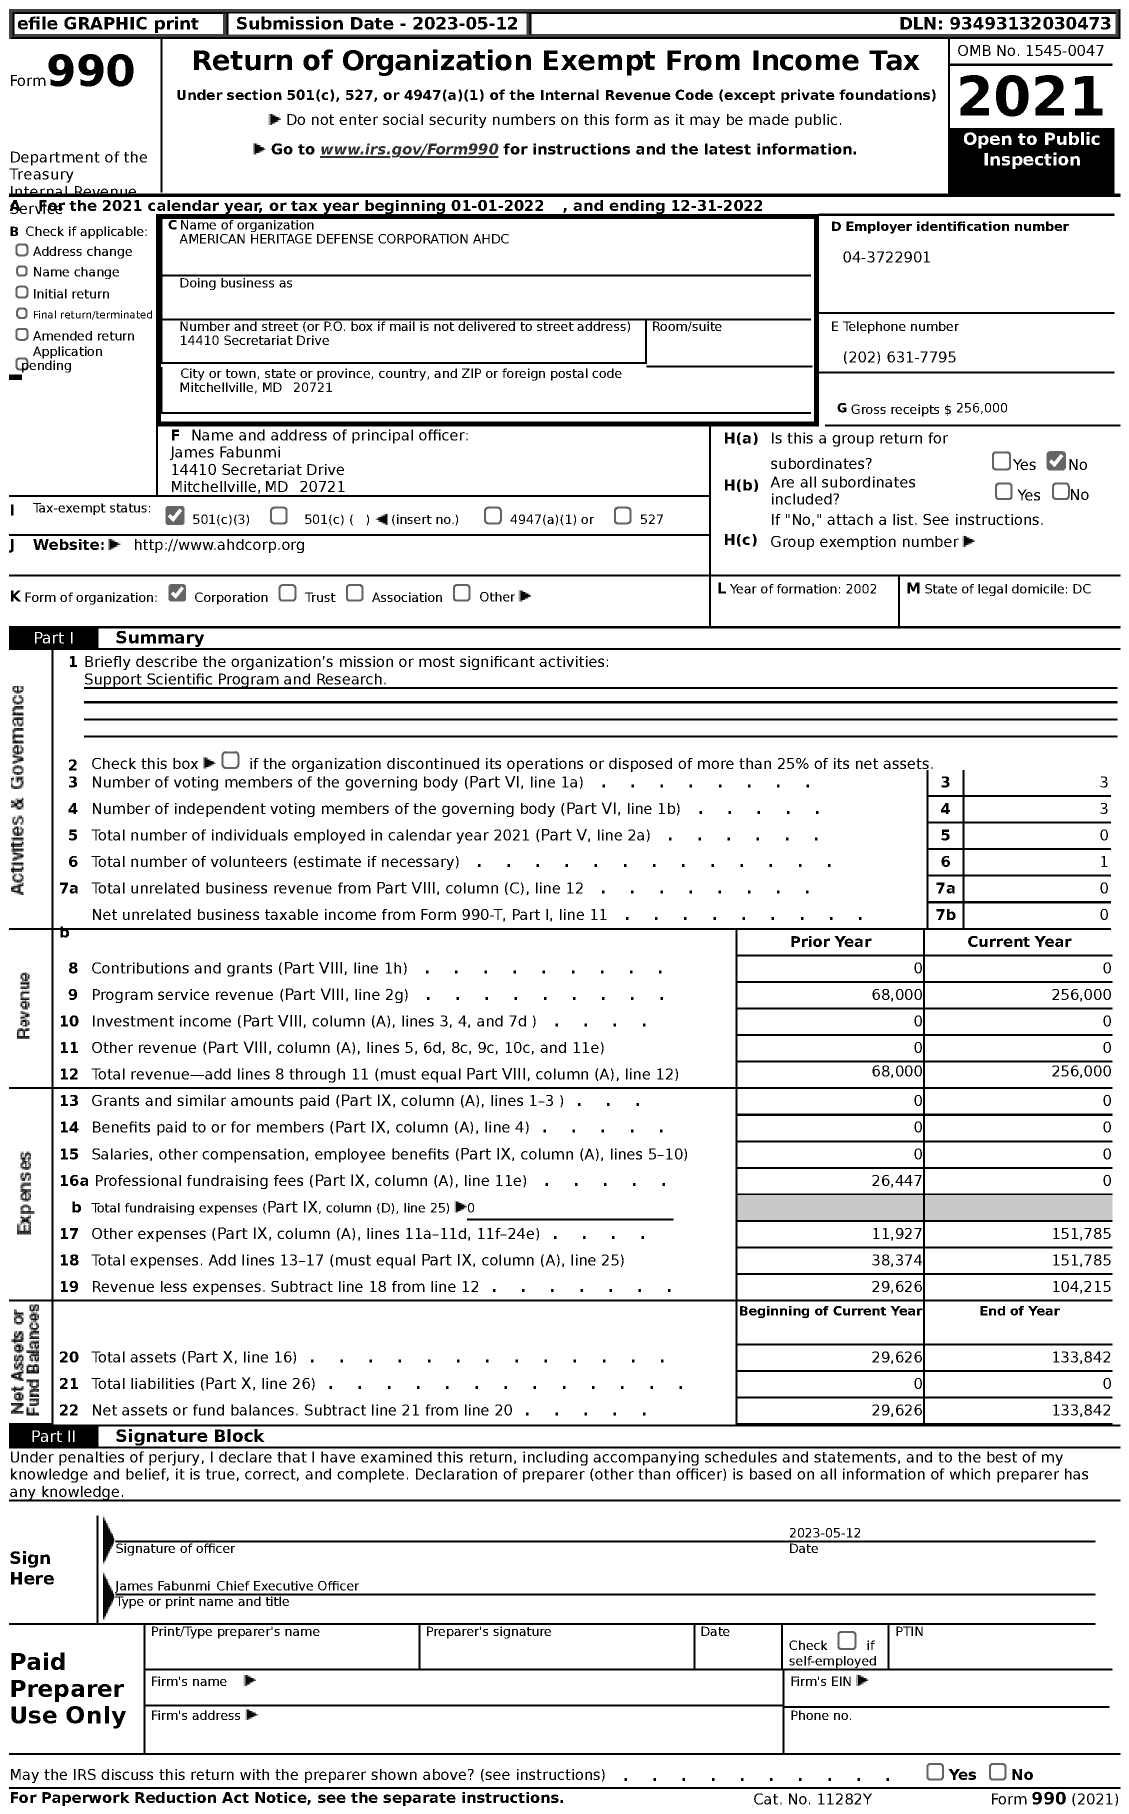 Image of first page of 2022 Form 990 for American Heritage Defense Corporation (AHDC)